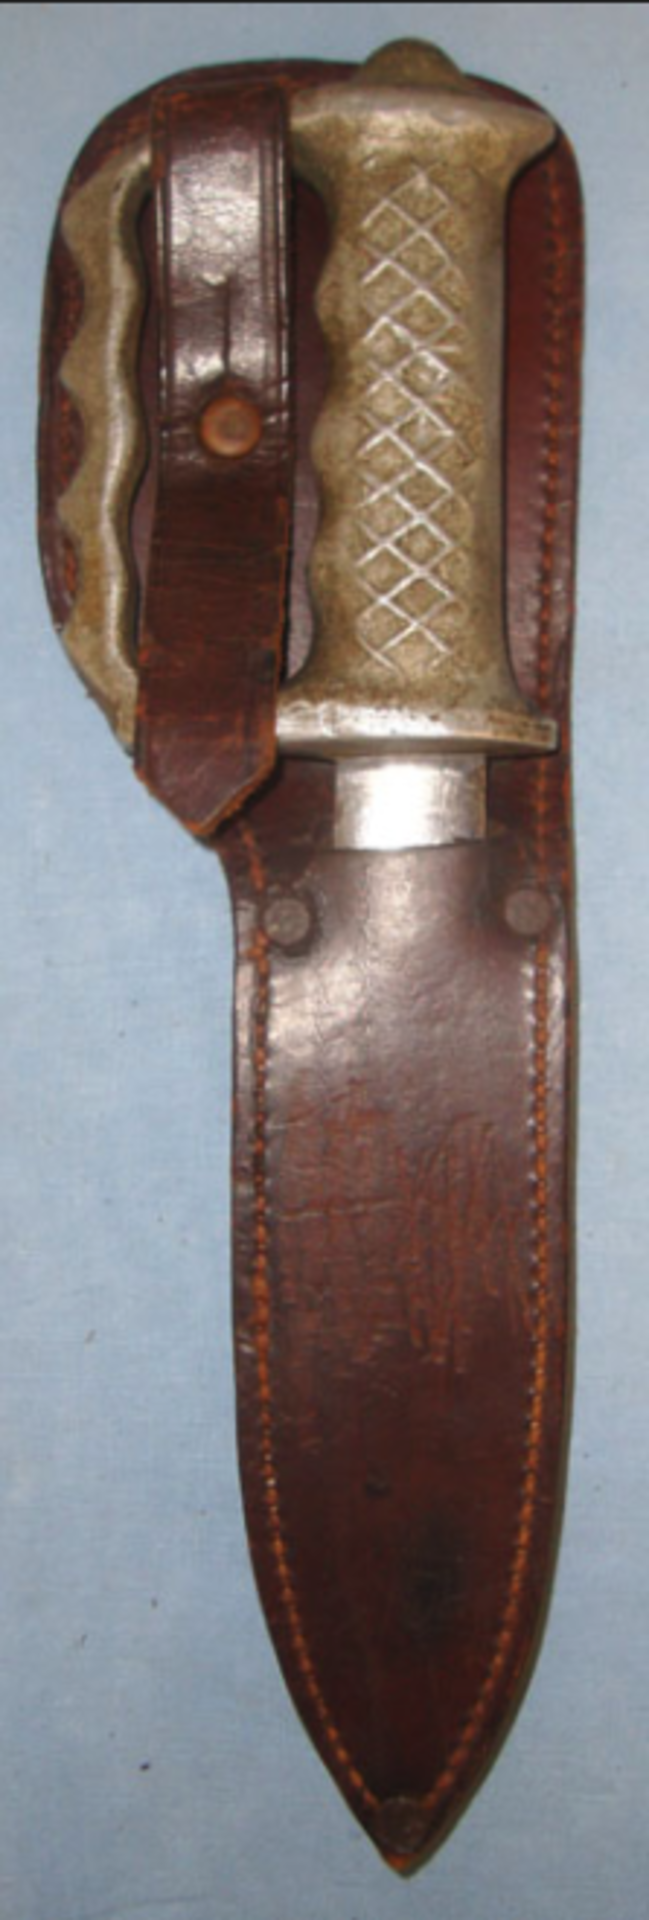 ORIGINAL WW2 Alloy Hilt New Zealand Army Knuckle Knife With Original Correct Scabbard - Image 2 of 3